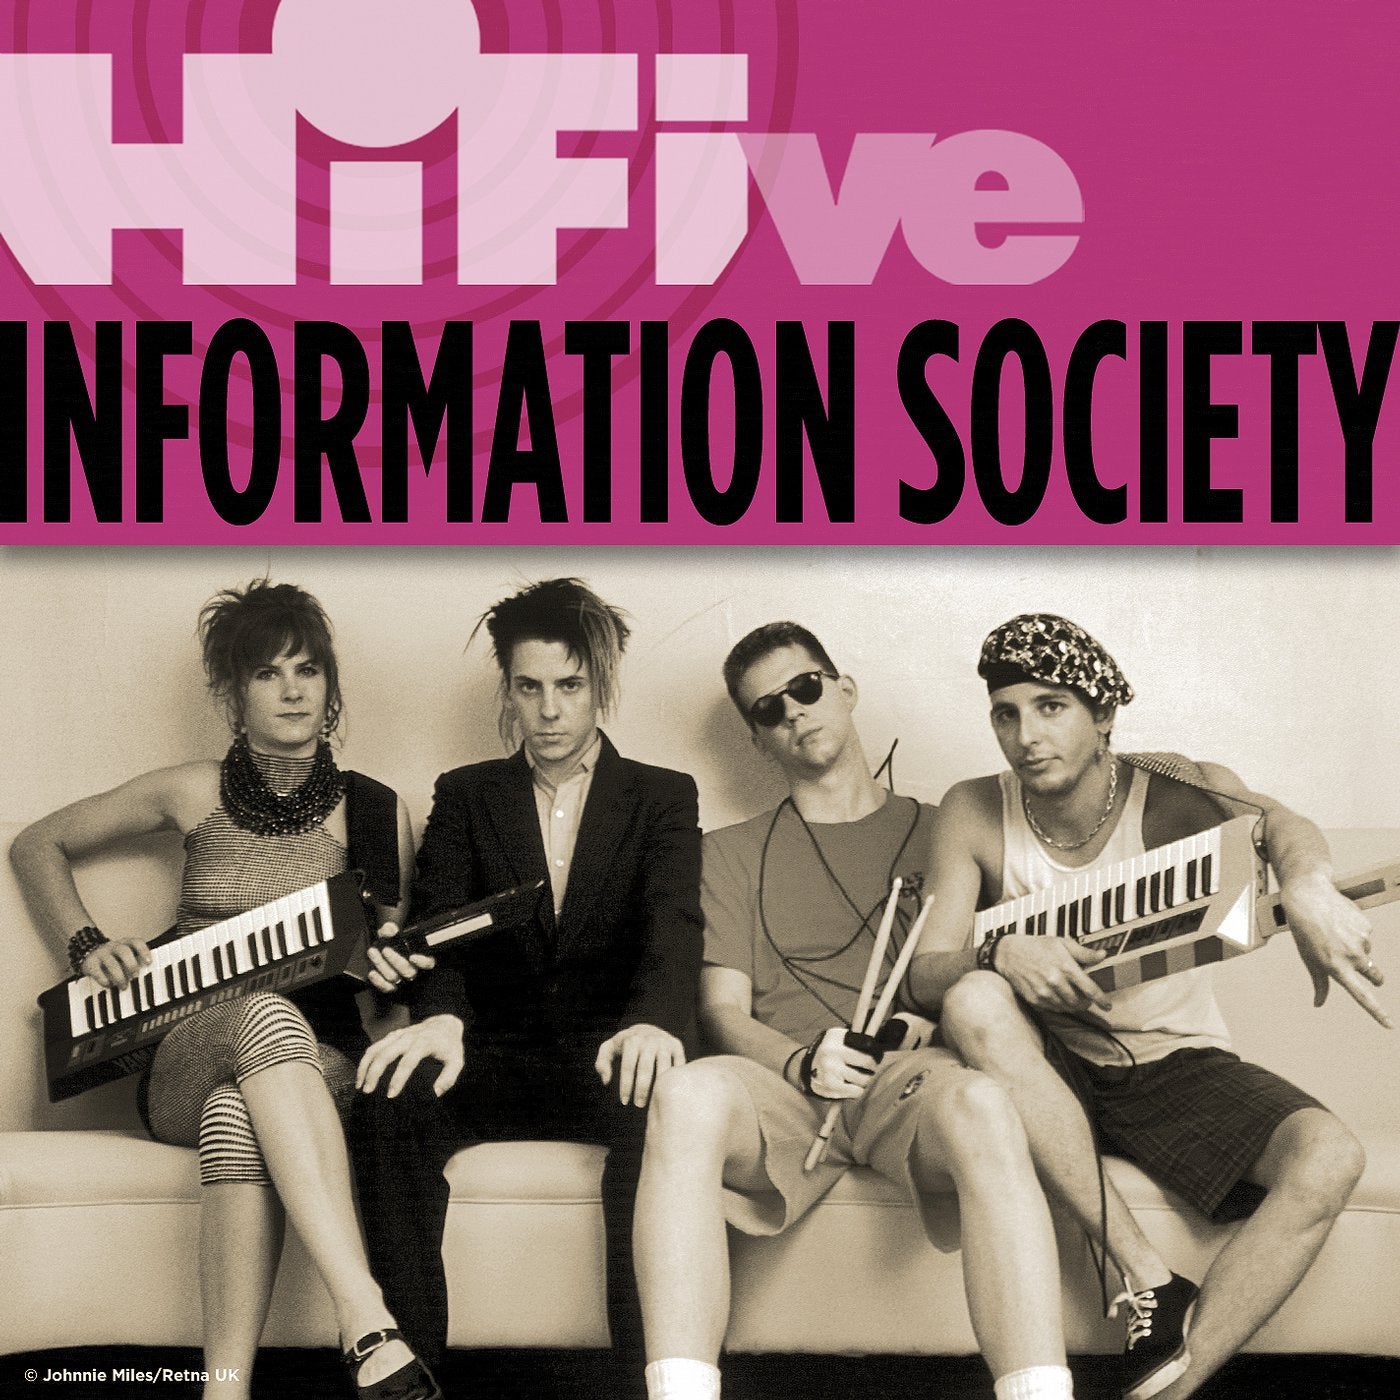 Society band. Information and Society. Five information. Informal Society. Information Society - what's on your Mind album Cover.